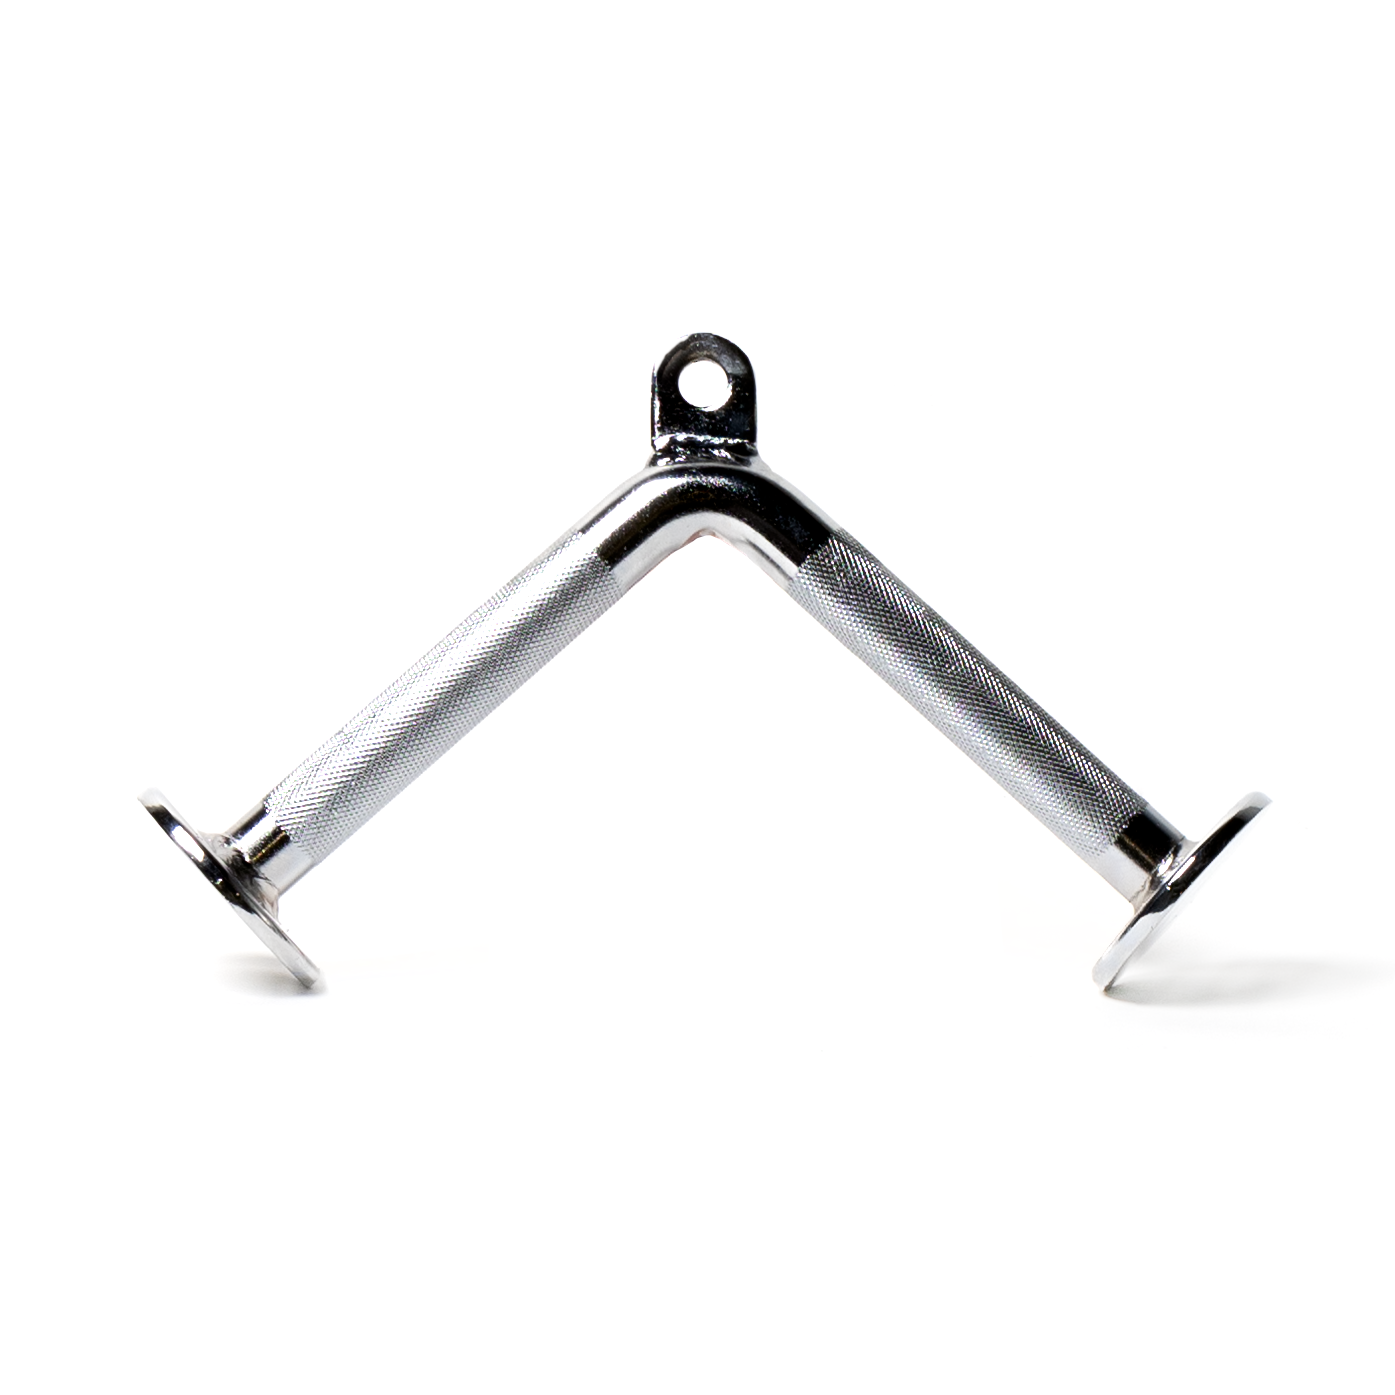 Aluminum tricep pressdown v handle from Fitway available now at Fitness Experience